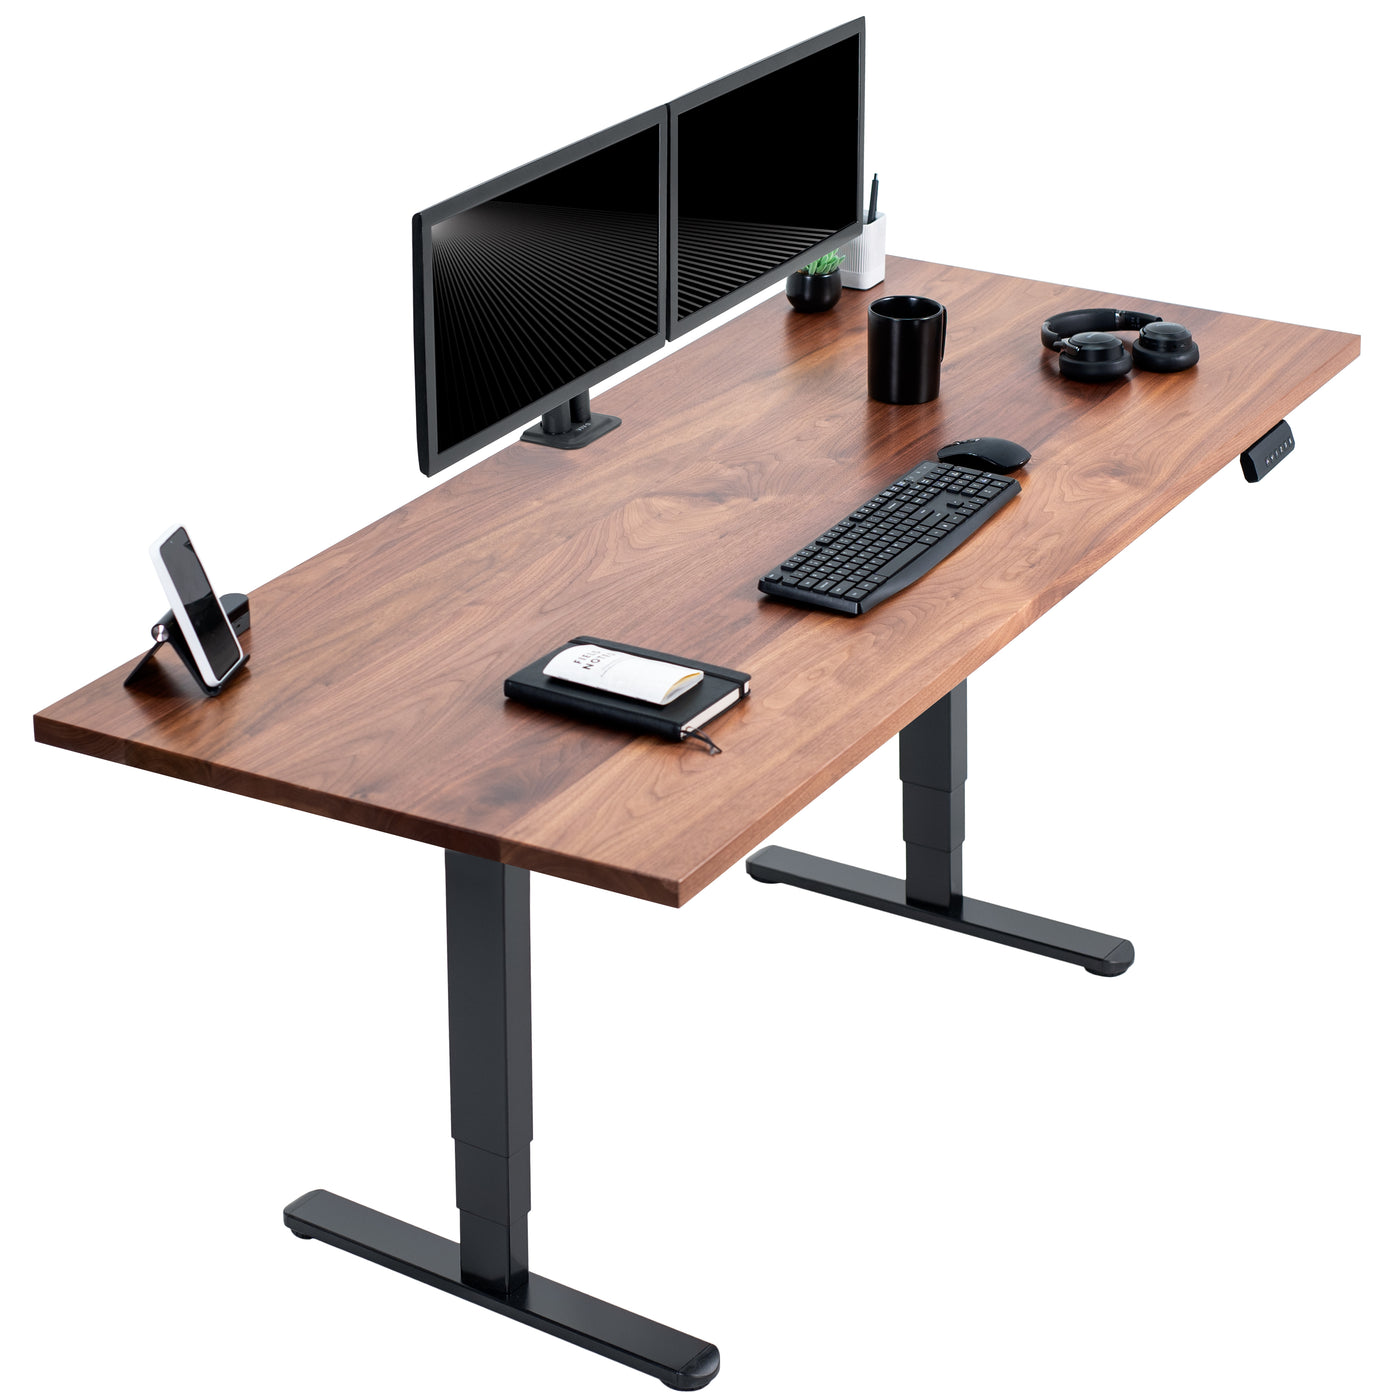 Solid walnut top spacious height adjustable electric desk with smart control panel.